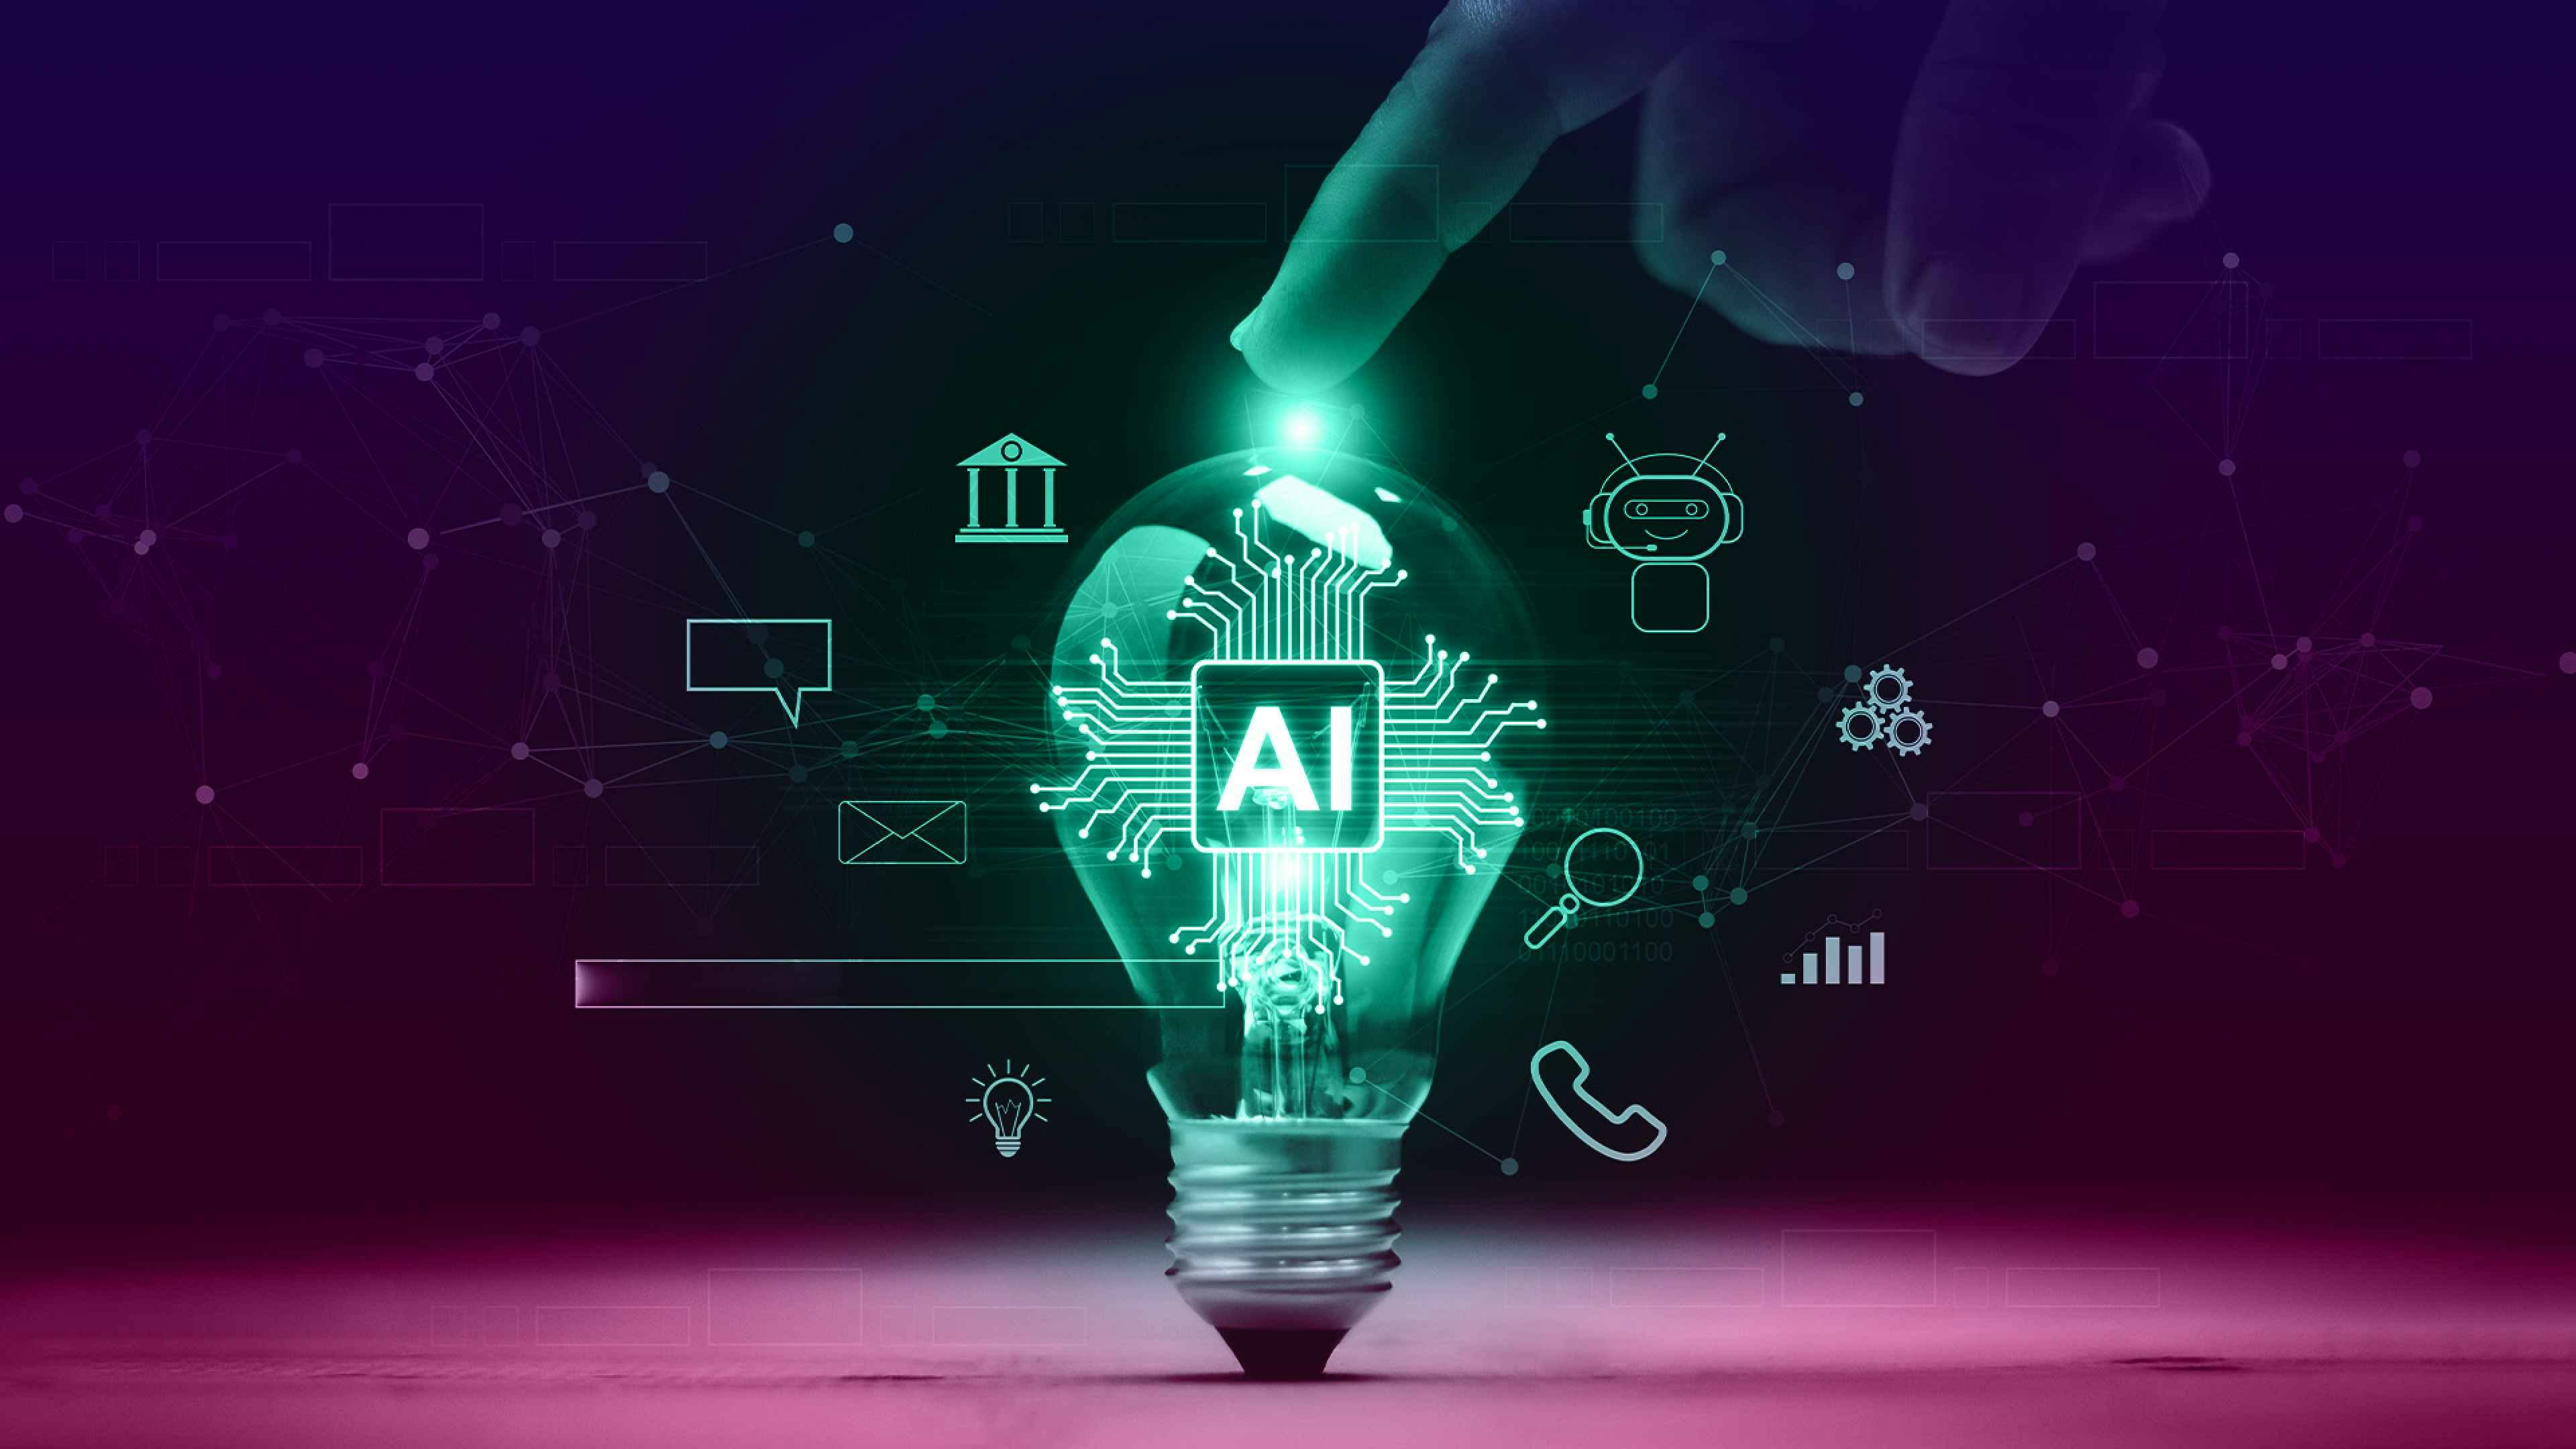 How (and when) will emerging AI rules impact your business?